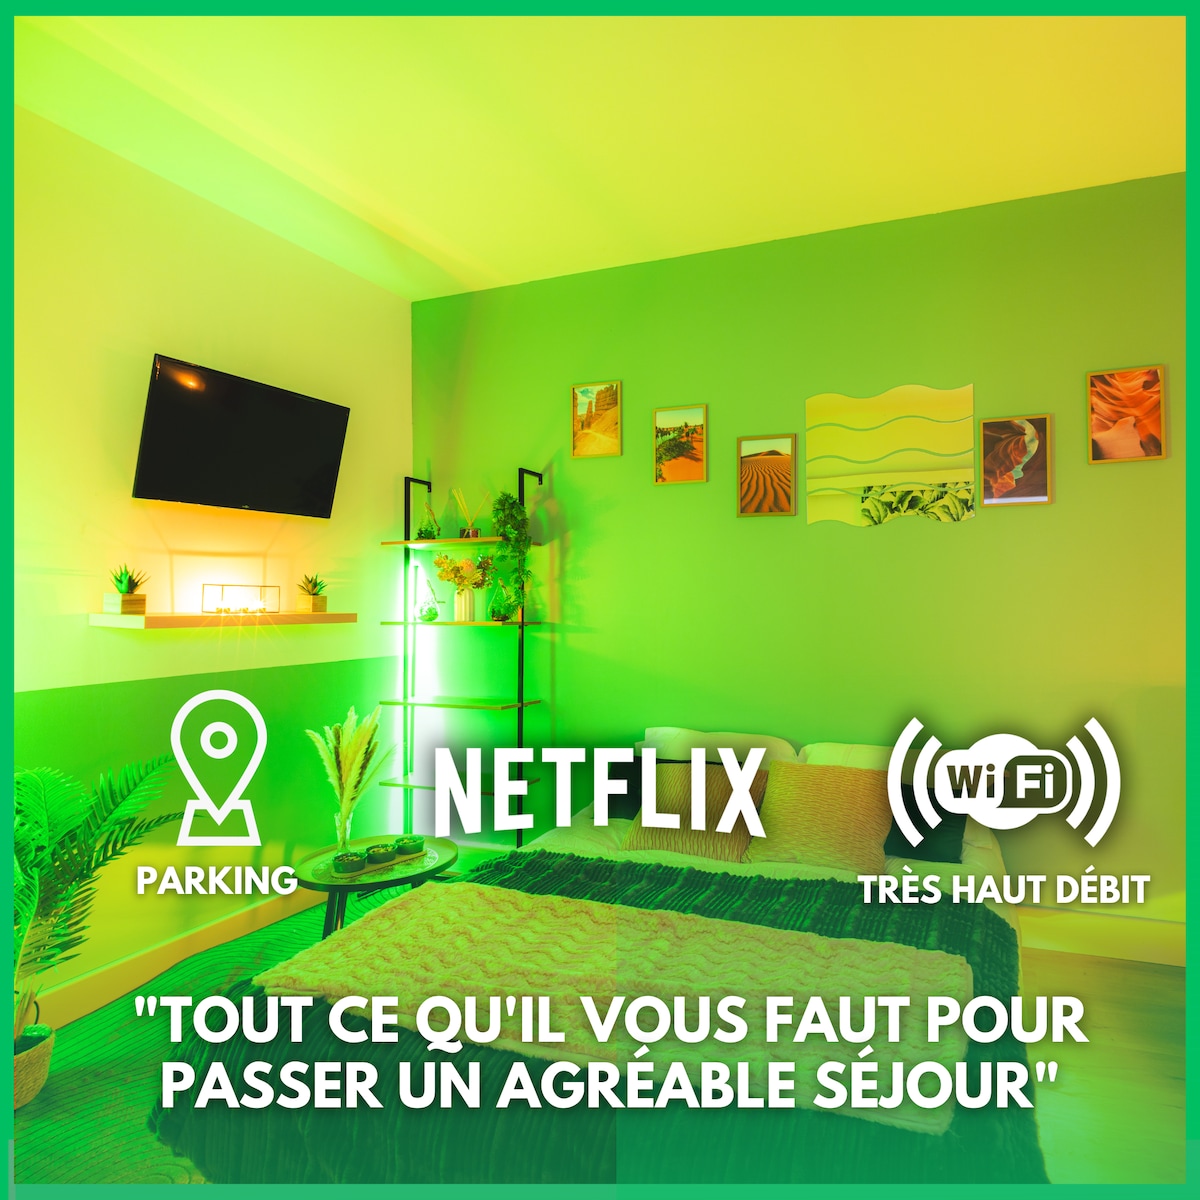 Le Nocturne - Netflix | WIFI - Coconing & Cosy